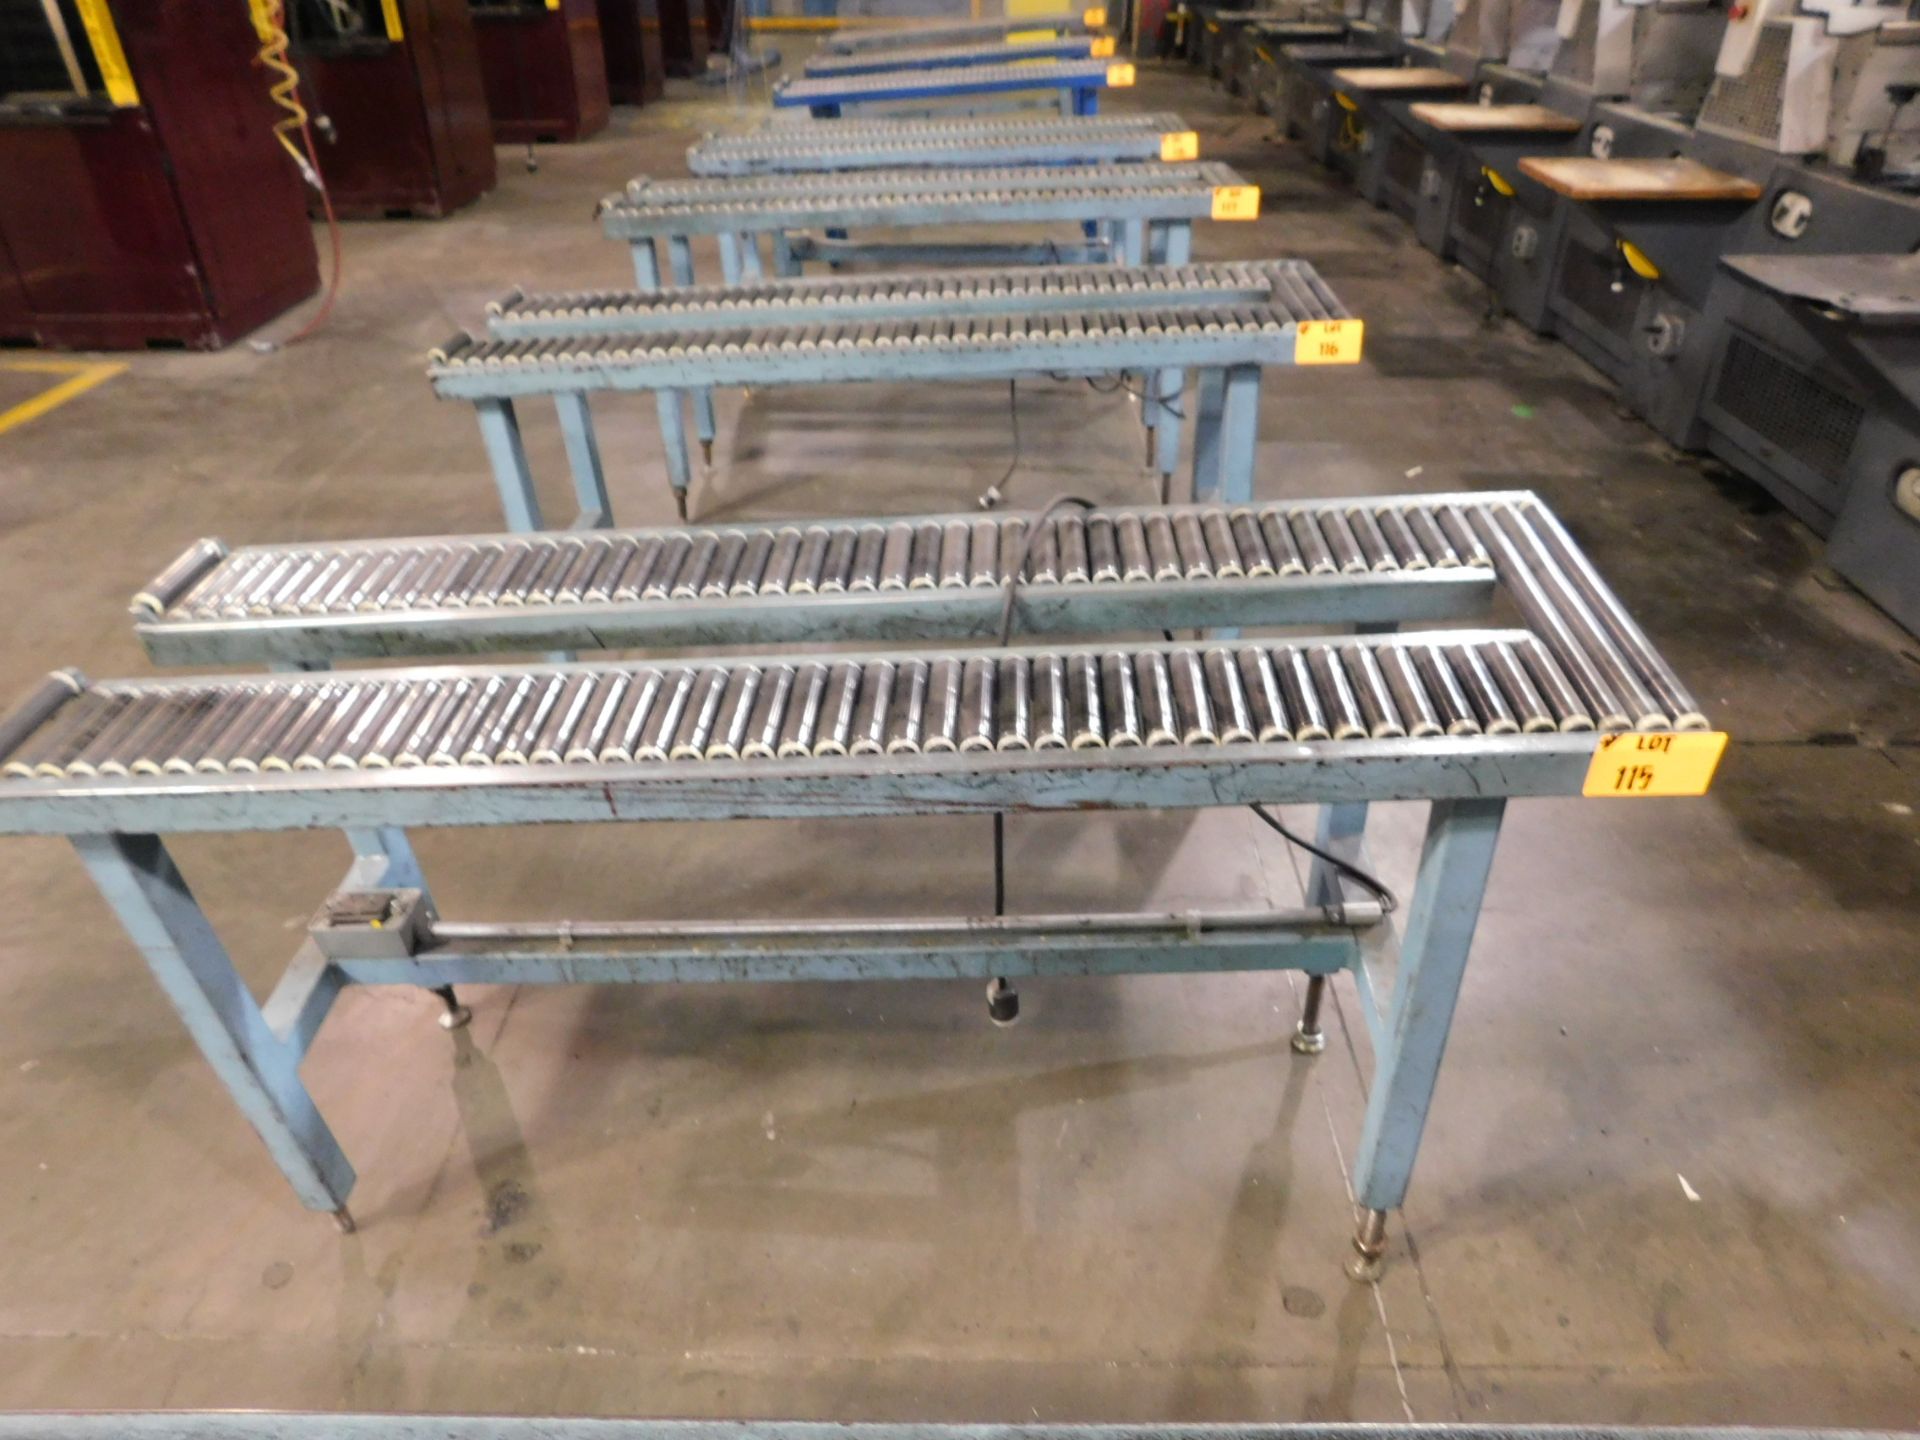 2000 Dynark banding machine with discharge roller conveyor, 5 ft. long by 18 in. wide, mobile, asset - Image 3 of 3